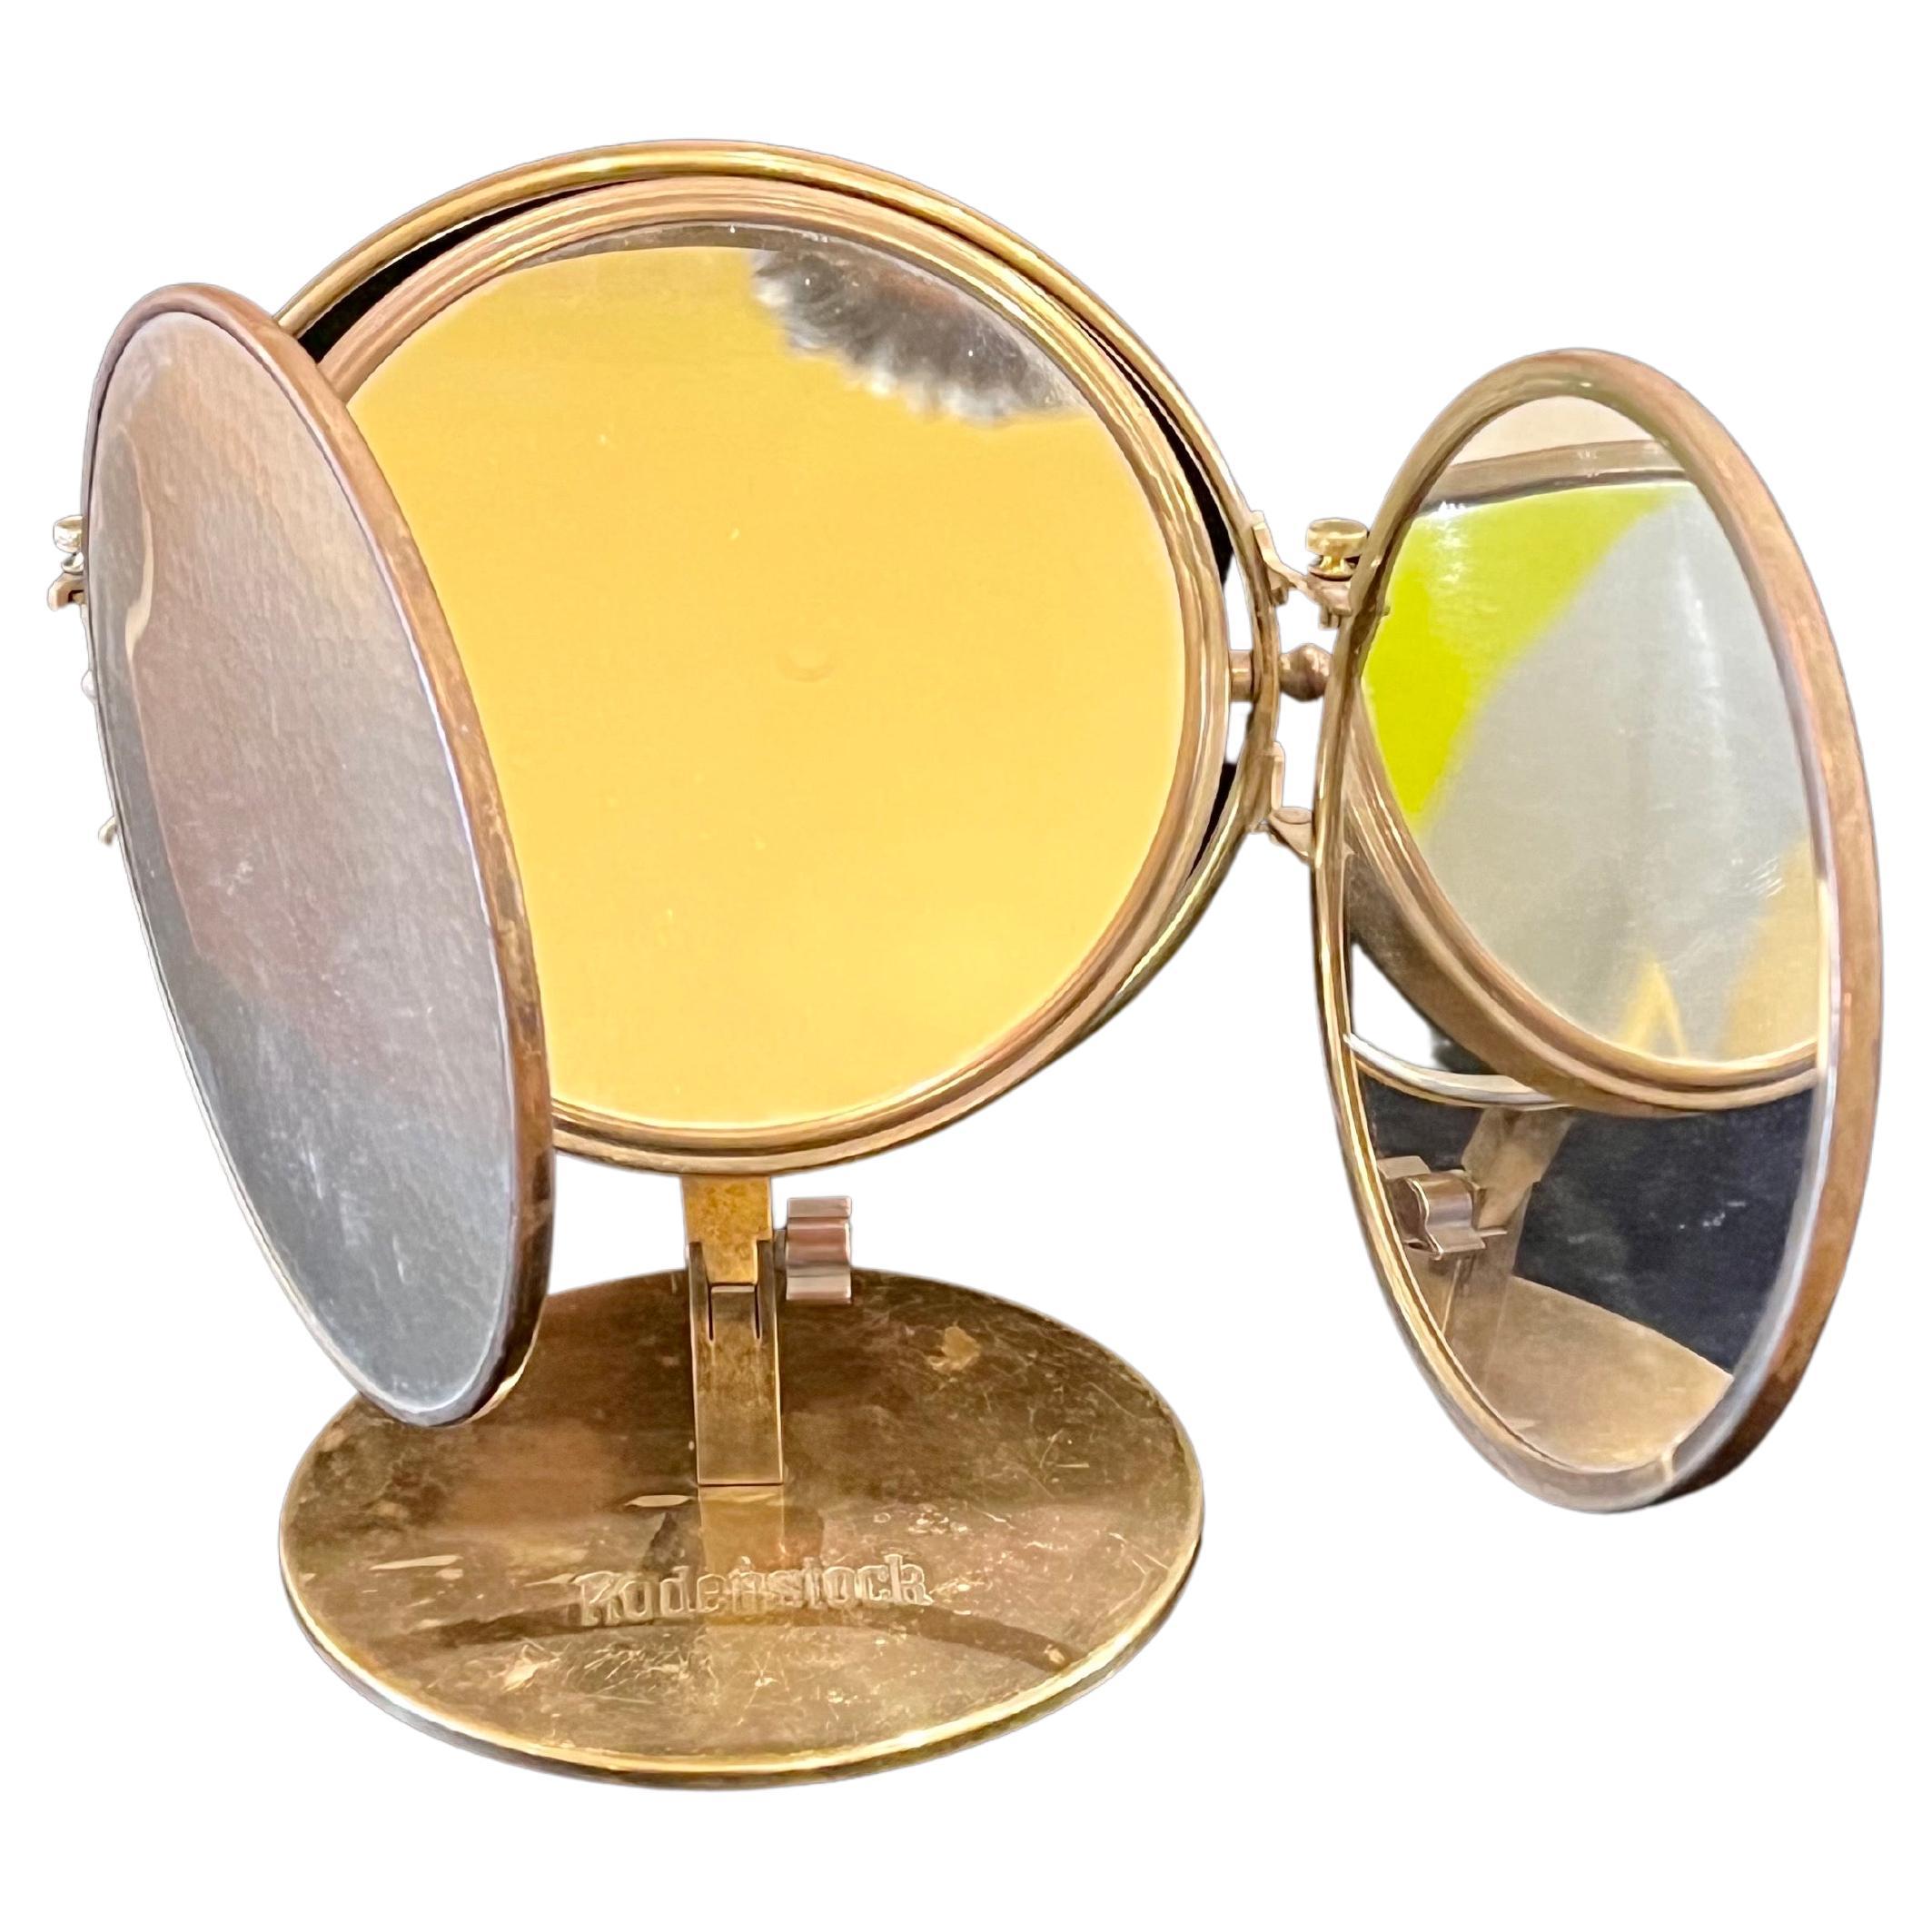 Beautiful multidirectional triple brass optometry mirror, circa 1940s in patinated brass from Rodenstock store in Germany.